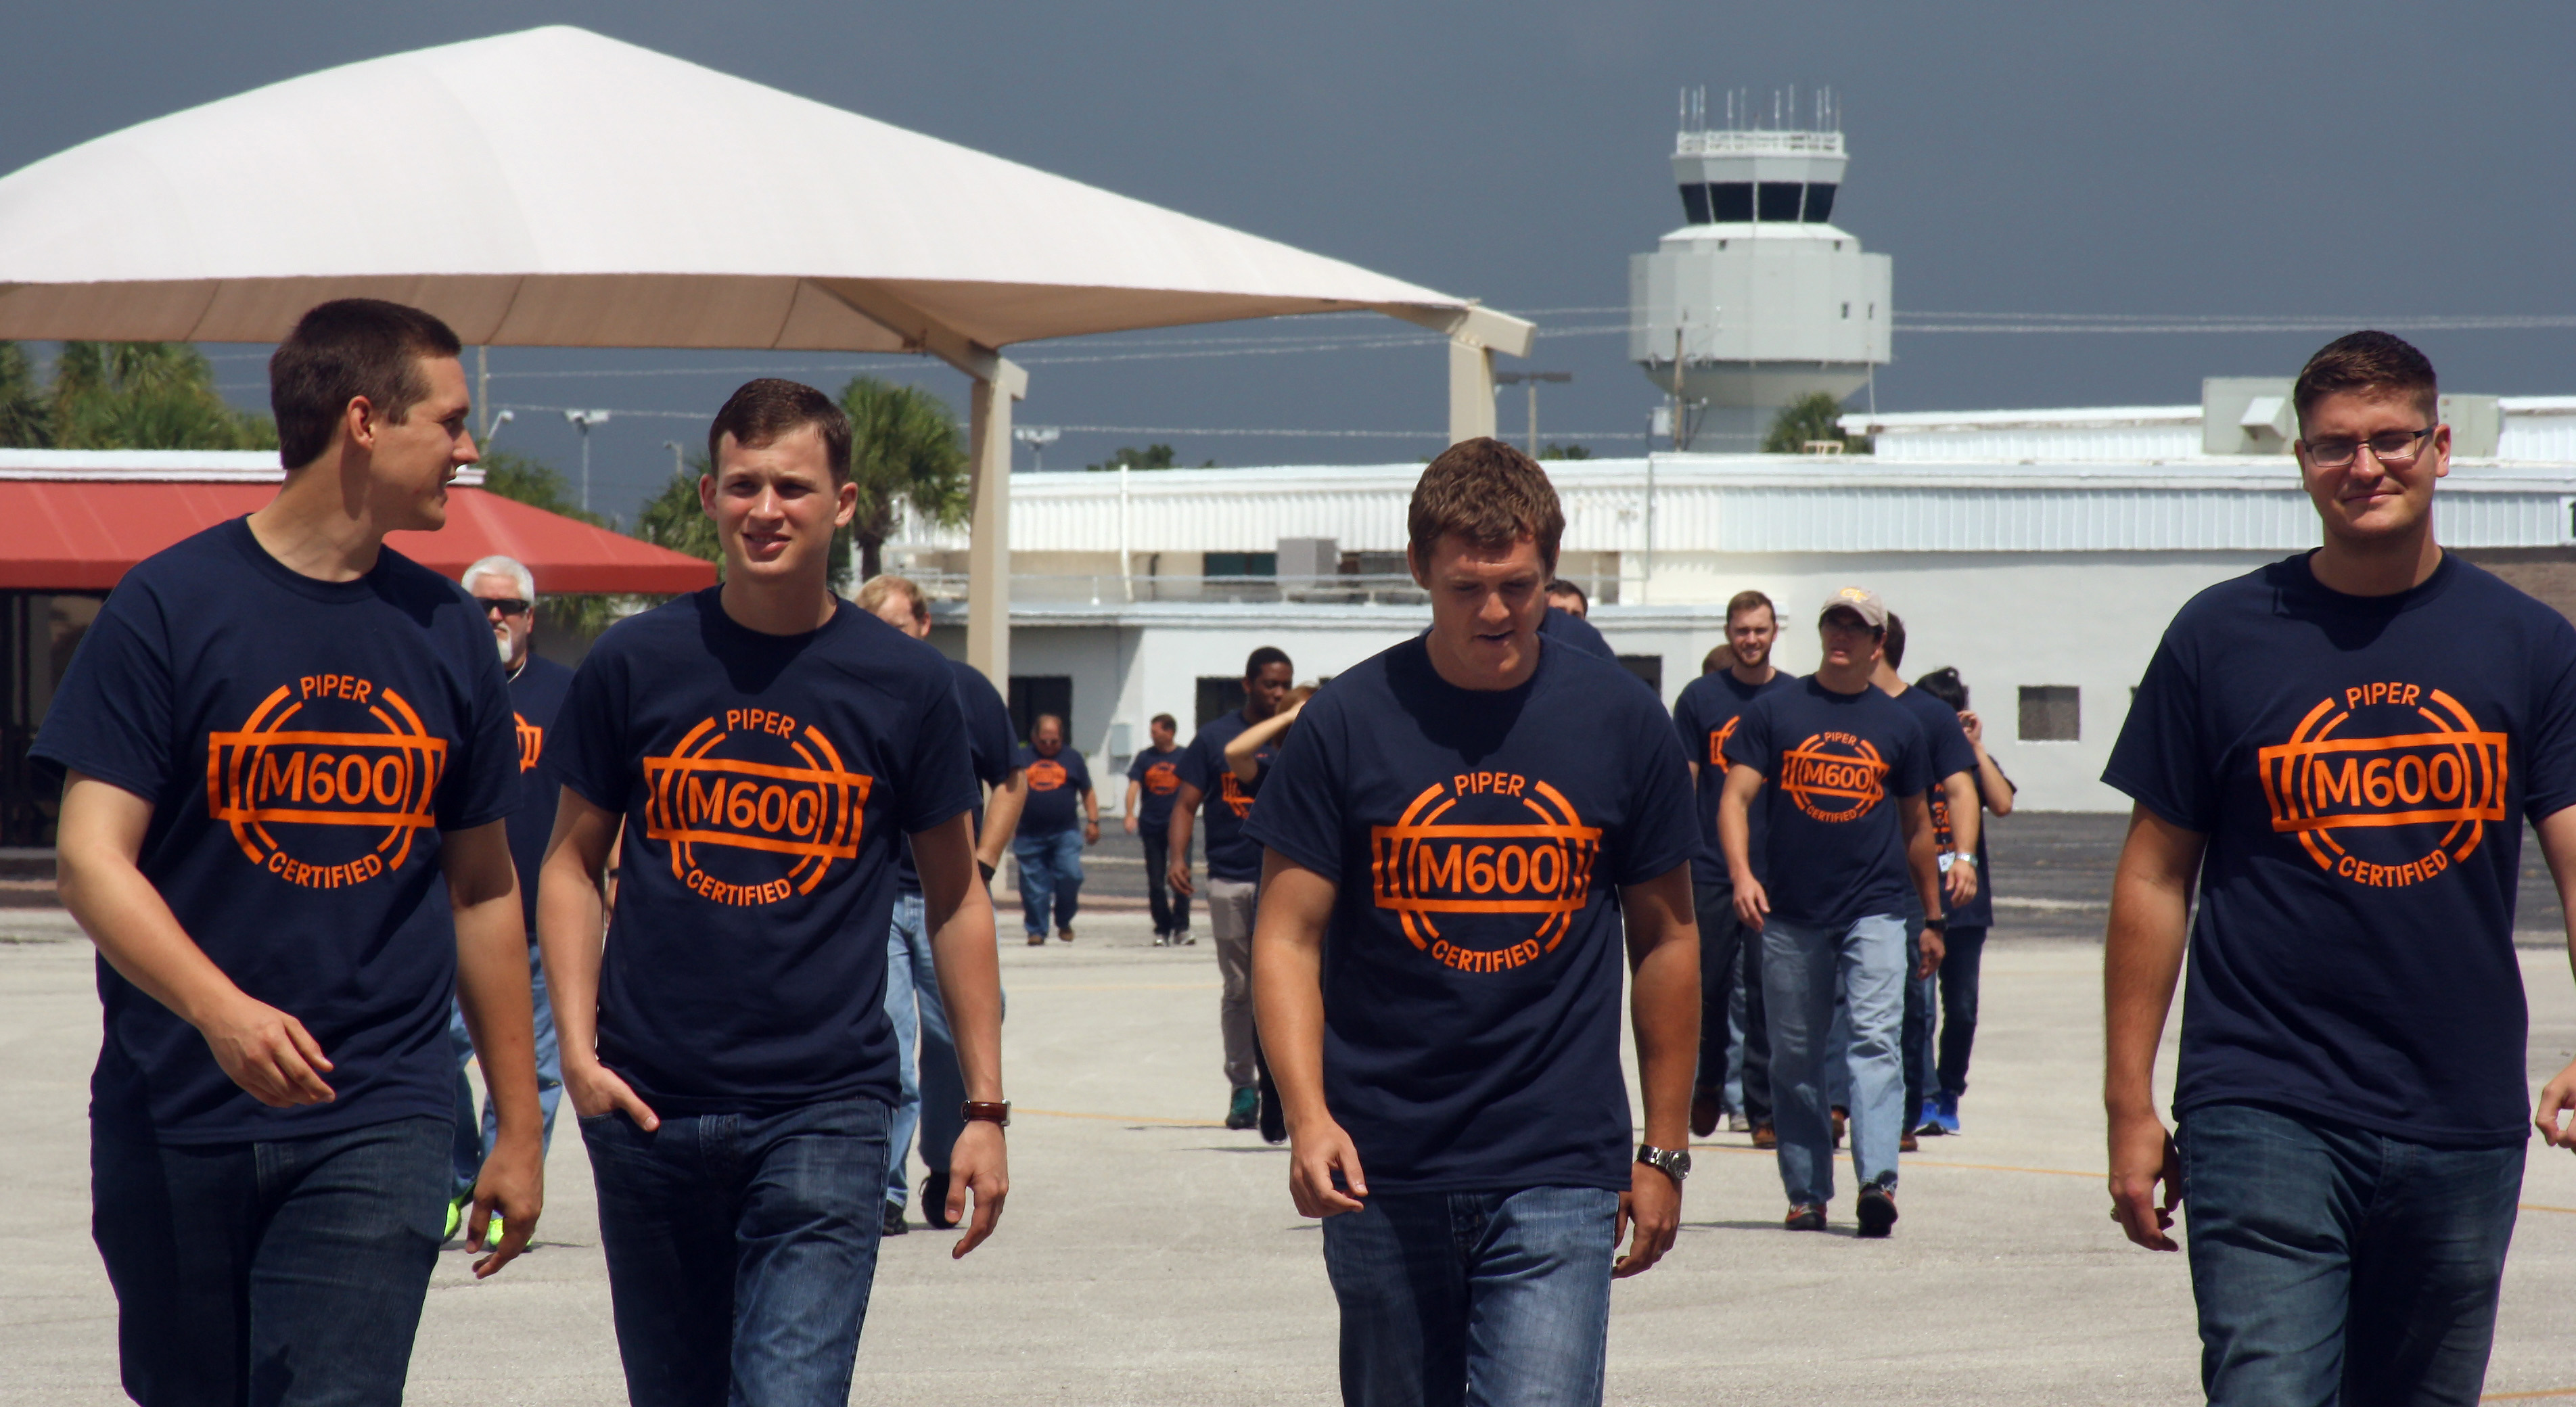 Piper Aircraft employees wear shirts to commemorate the M600's type certification during a celebration at the company's Vero Beach, Florida, facility. Photo by Jamie Beckett.